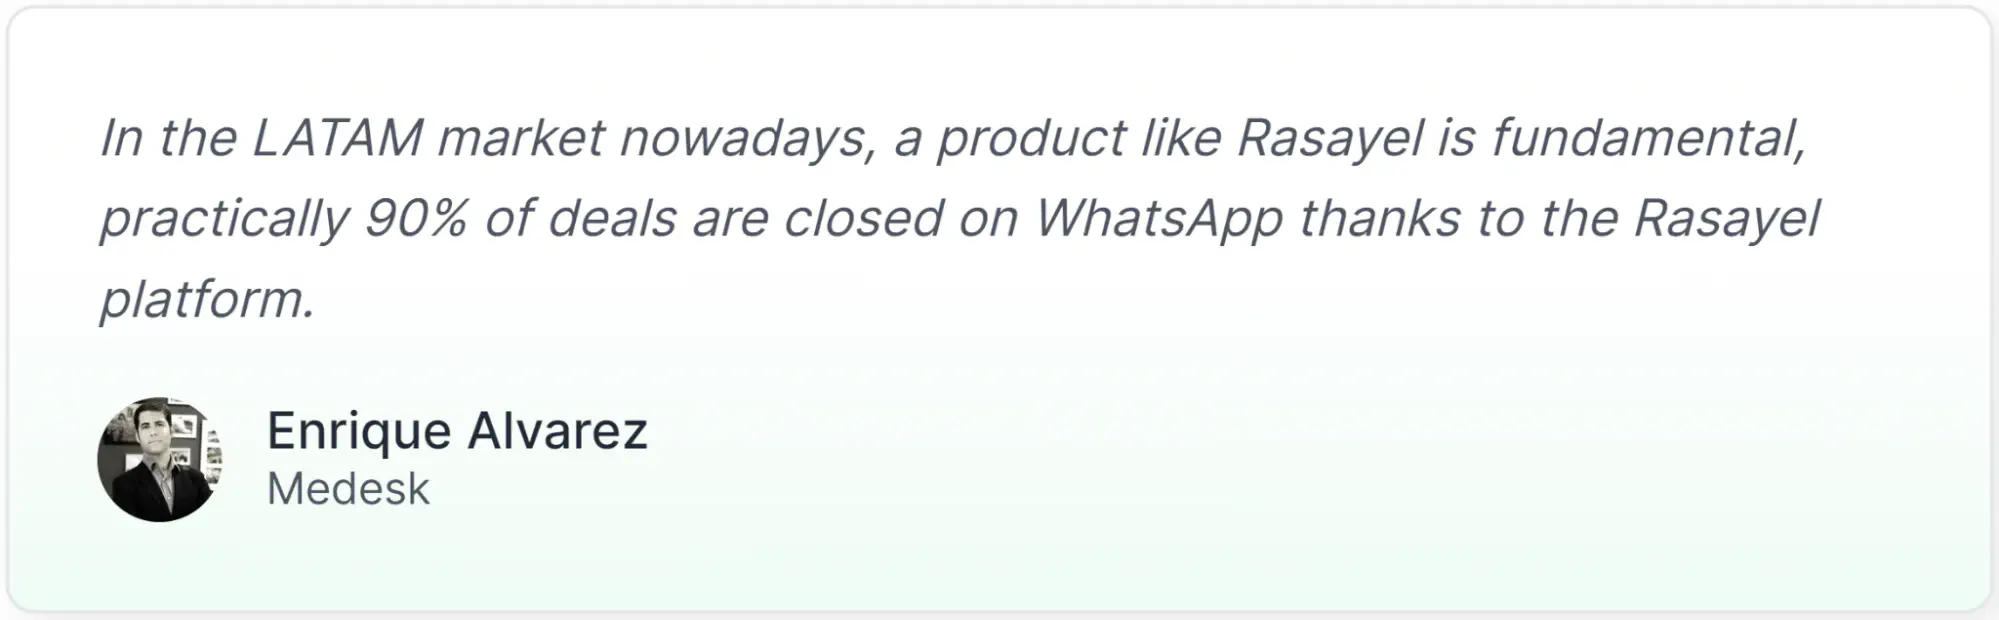 A quote by Enrique Alvarez stating that 90% of the deals are closed on WhatsApp thanks to Rasayel.